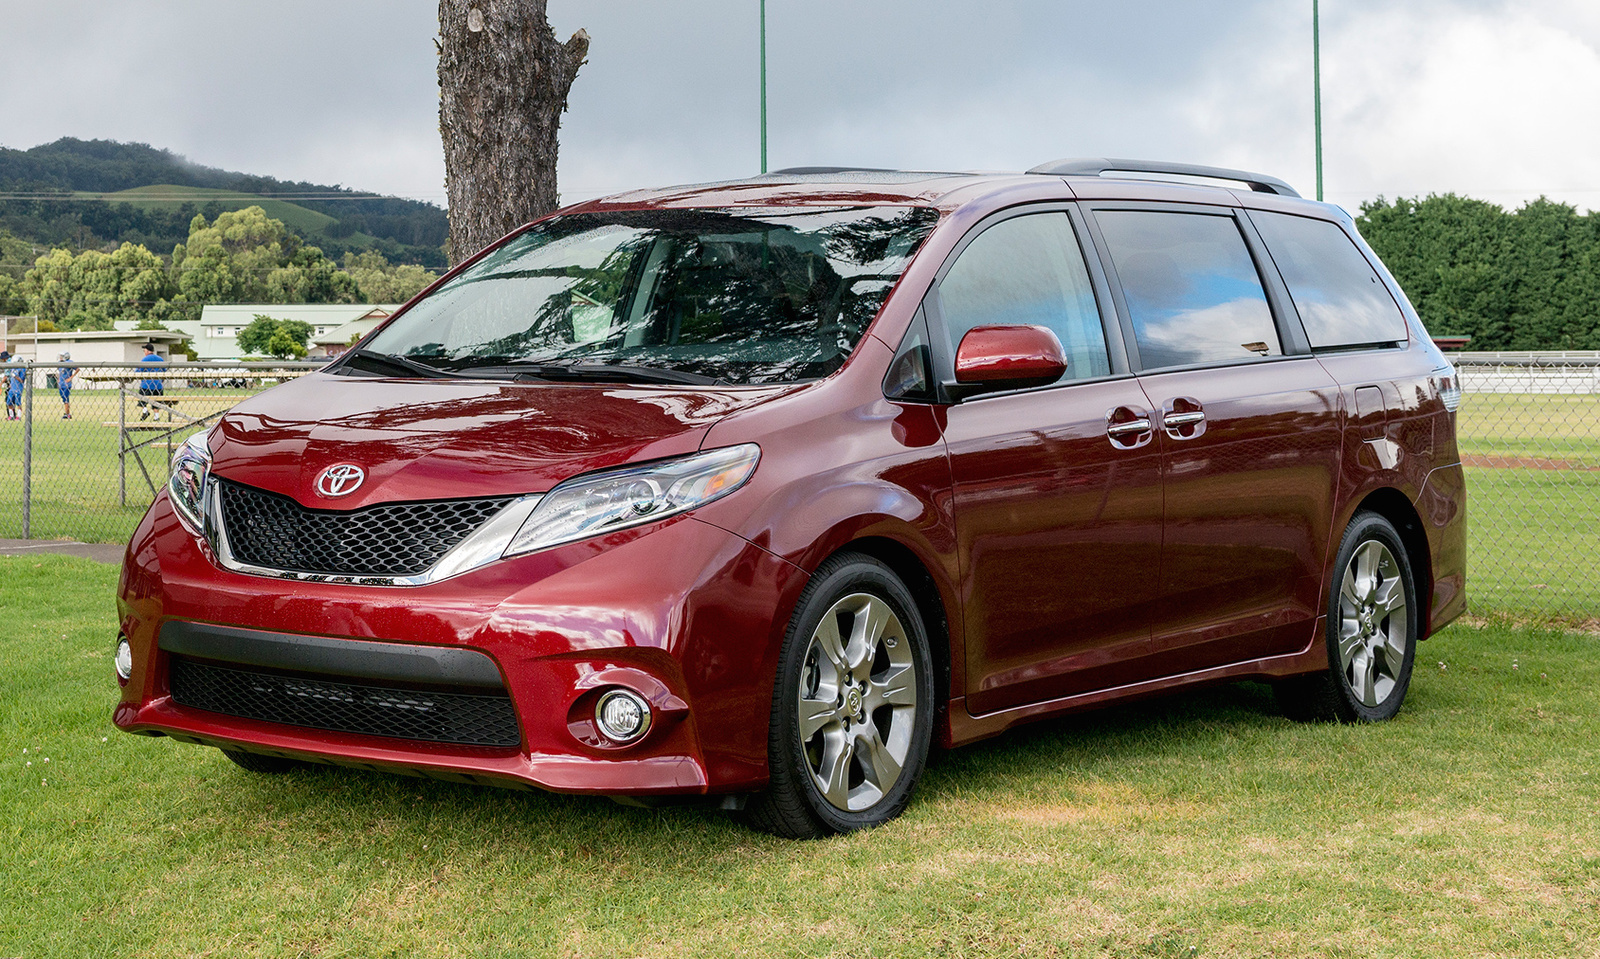 Video Review: 2016 Toyota Sienna Expert Test Drive - CarGurus